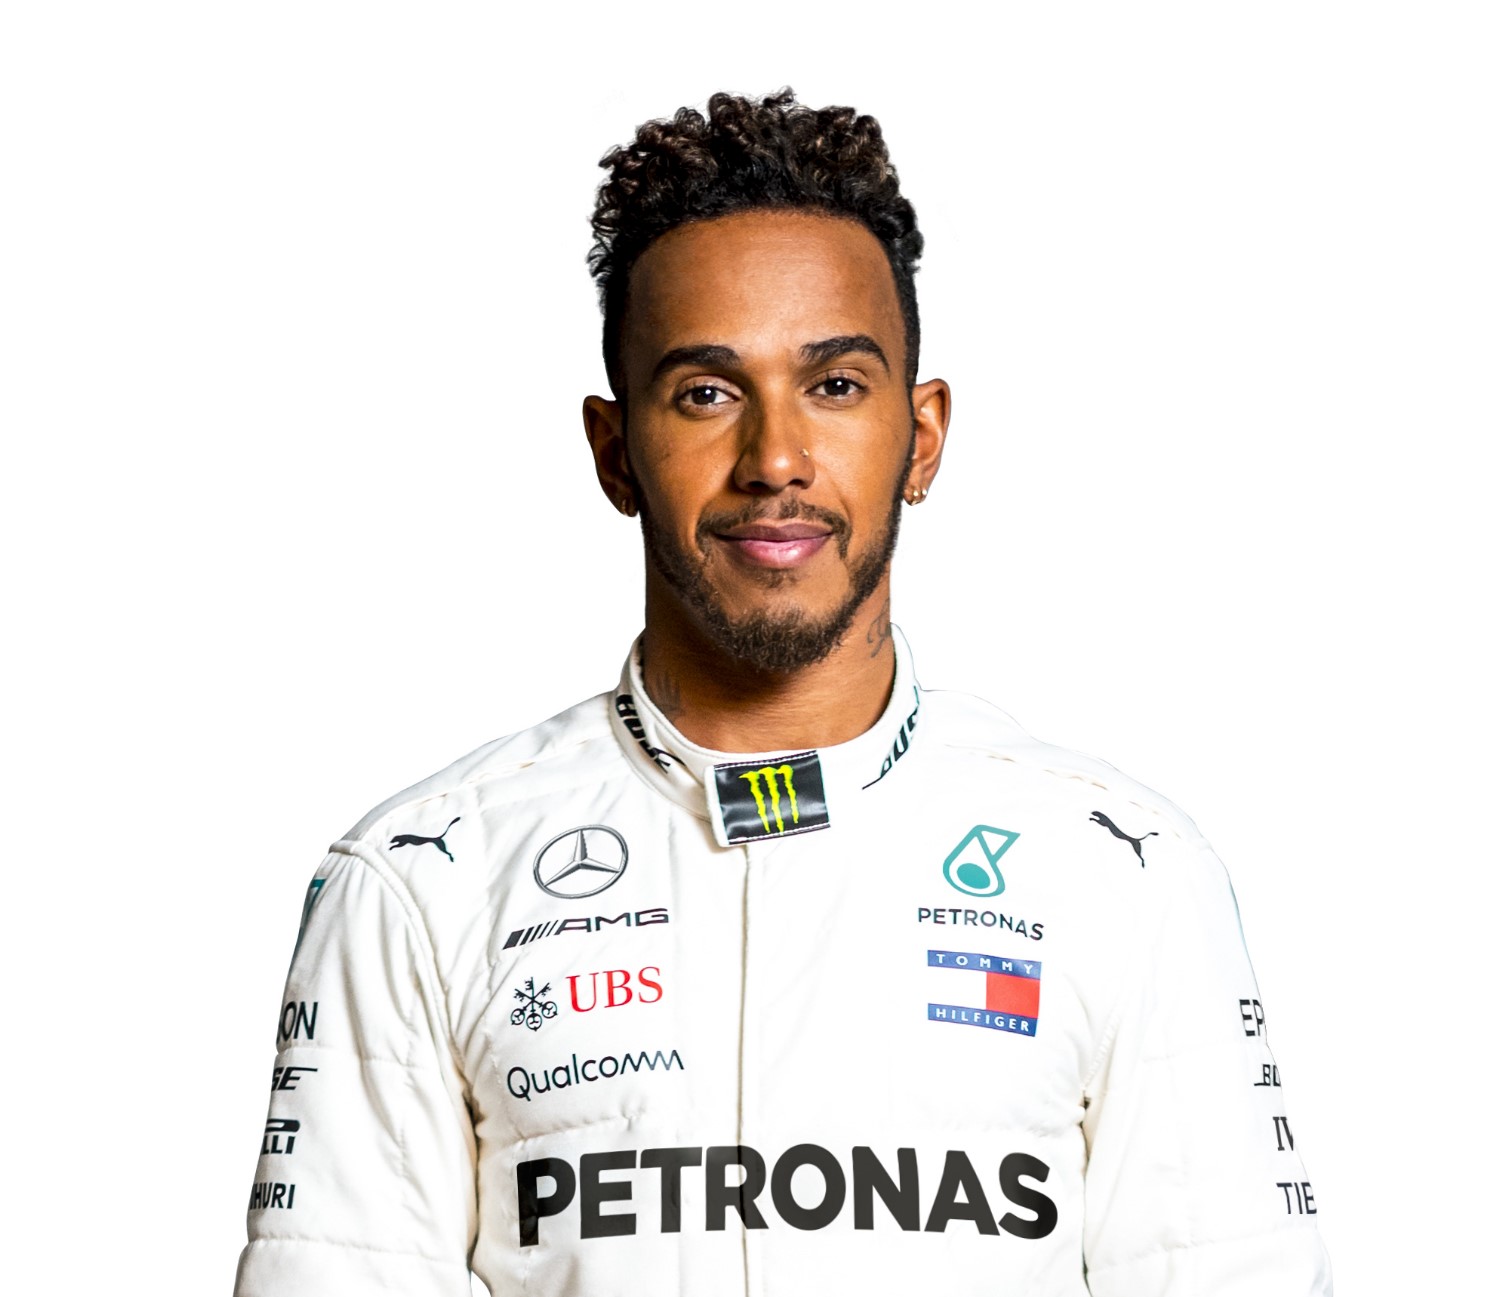 With Hamilton staying at Mercedes the top of the F1 driver market will remain unchanged